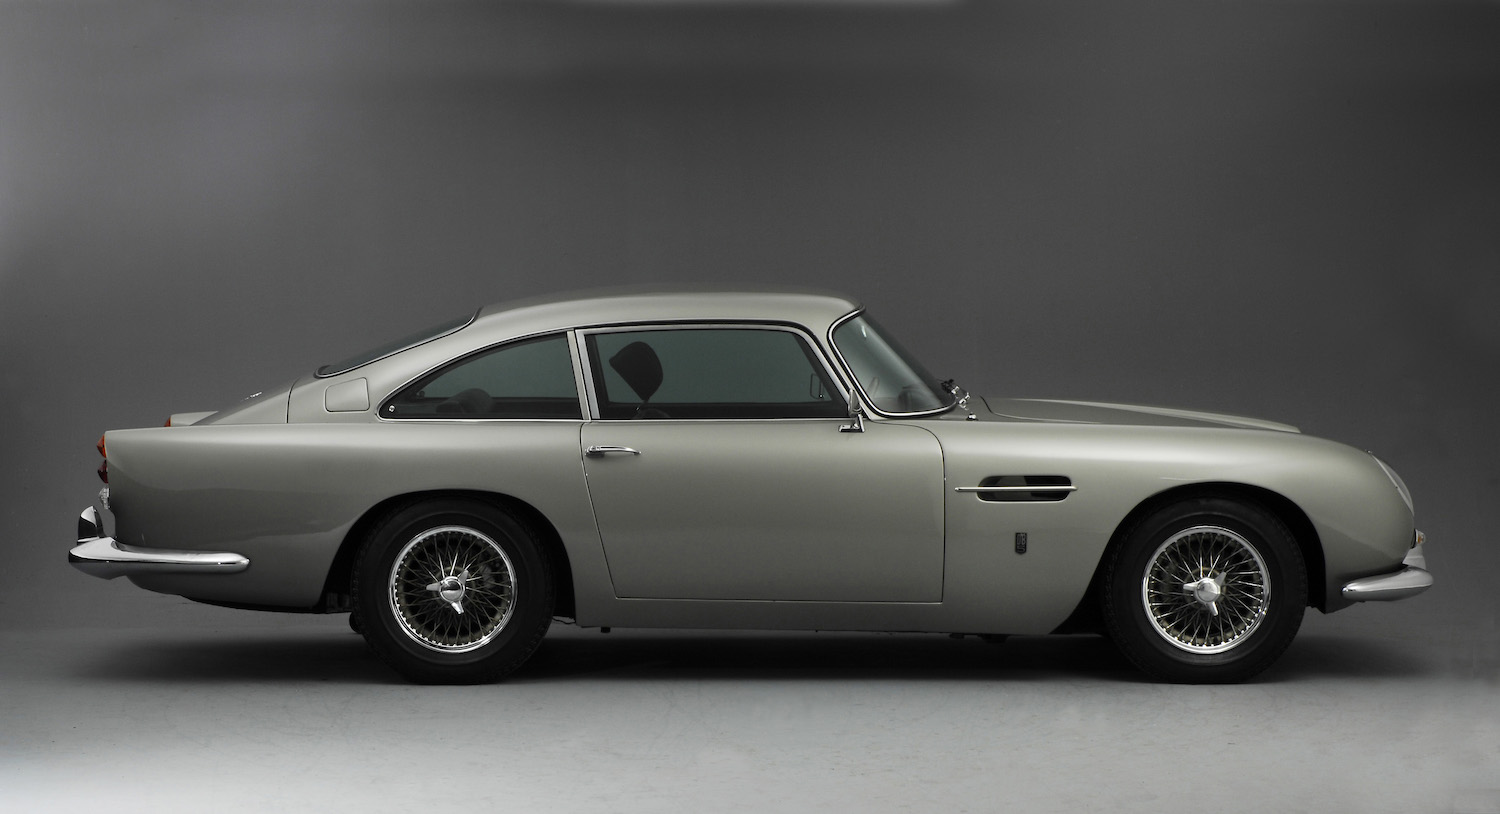 This is a photo of a 1964 Aston Martin DB5. The same car was featured in Comedians in Cars Getting Coffee's Seinfeld reunion with Julia Louis-Dreyfus. |National Motor Museum/Heritage Images/Getty Images